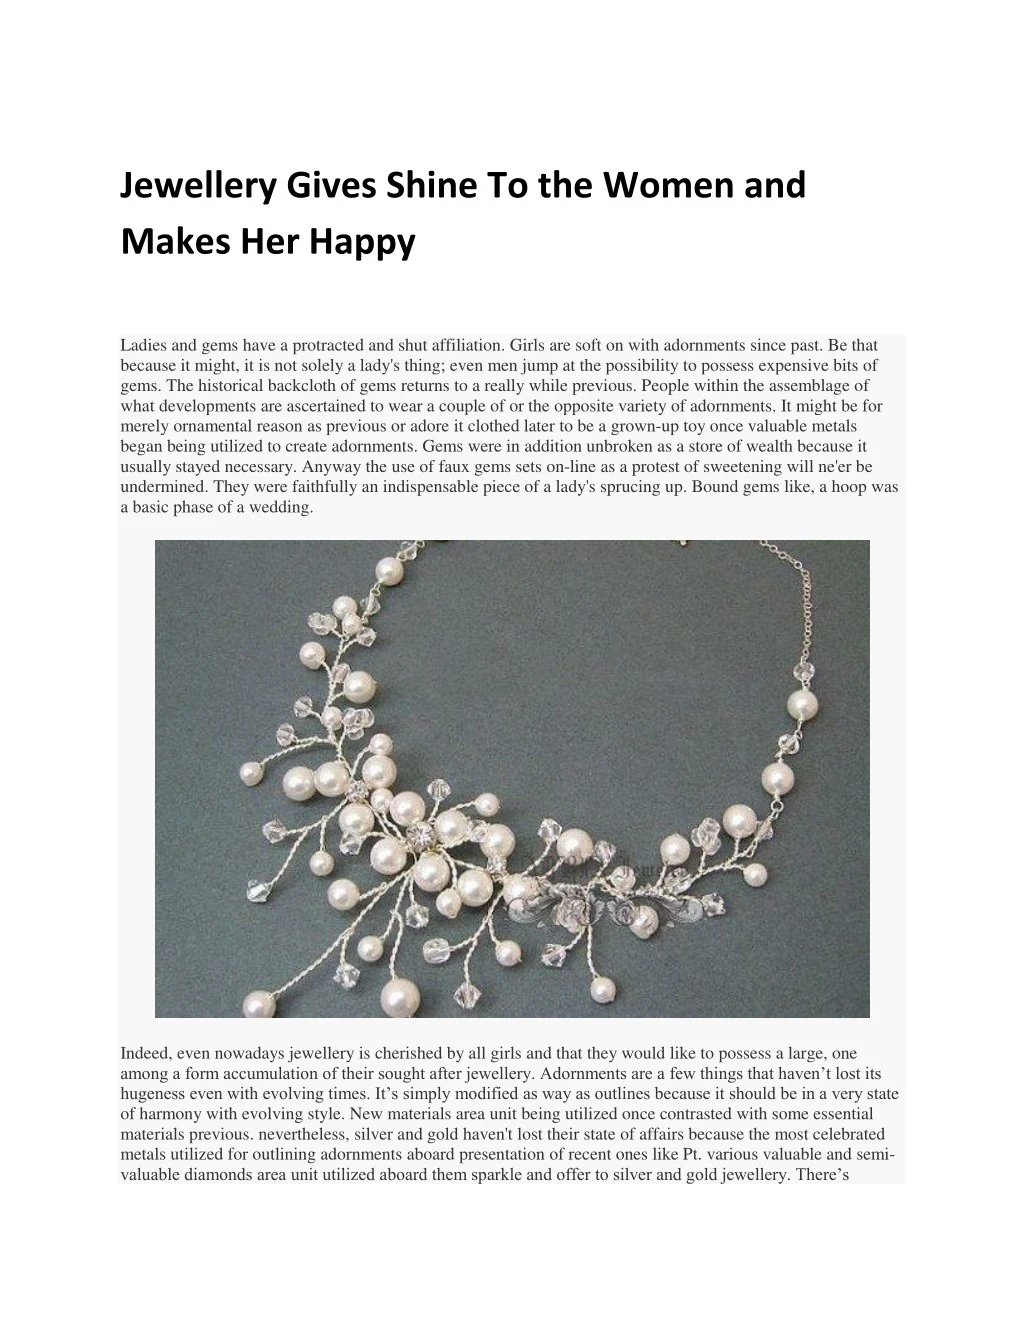 jewellery gives shine to the women and makes